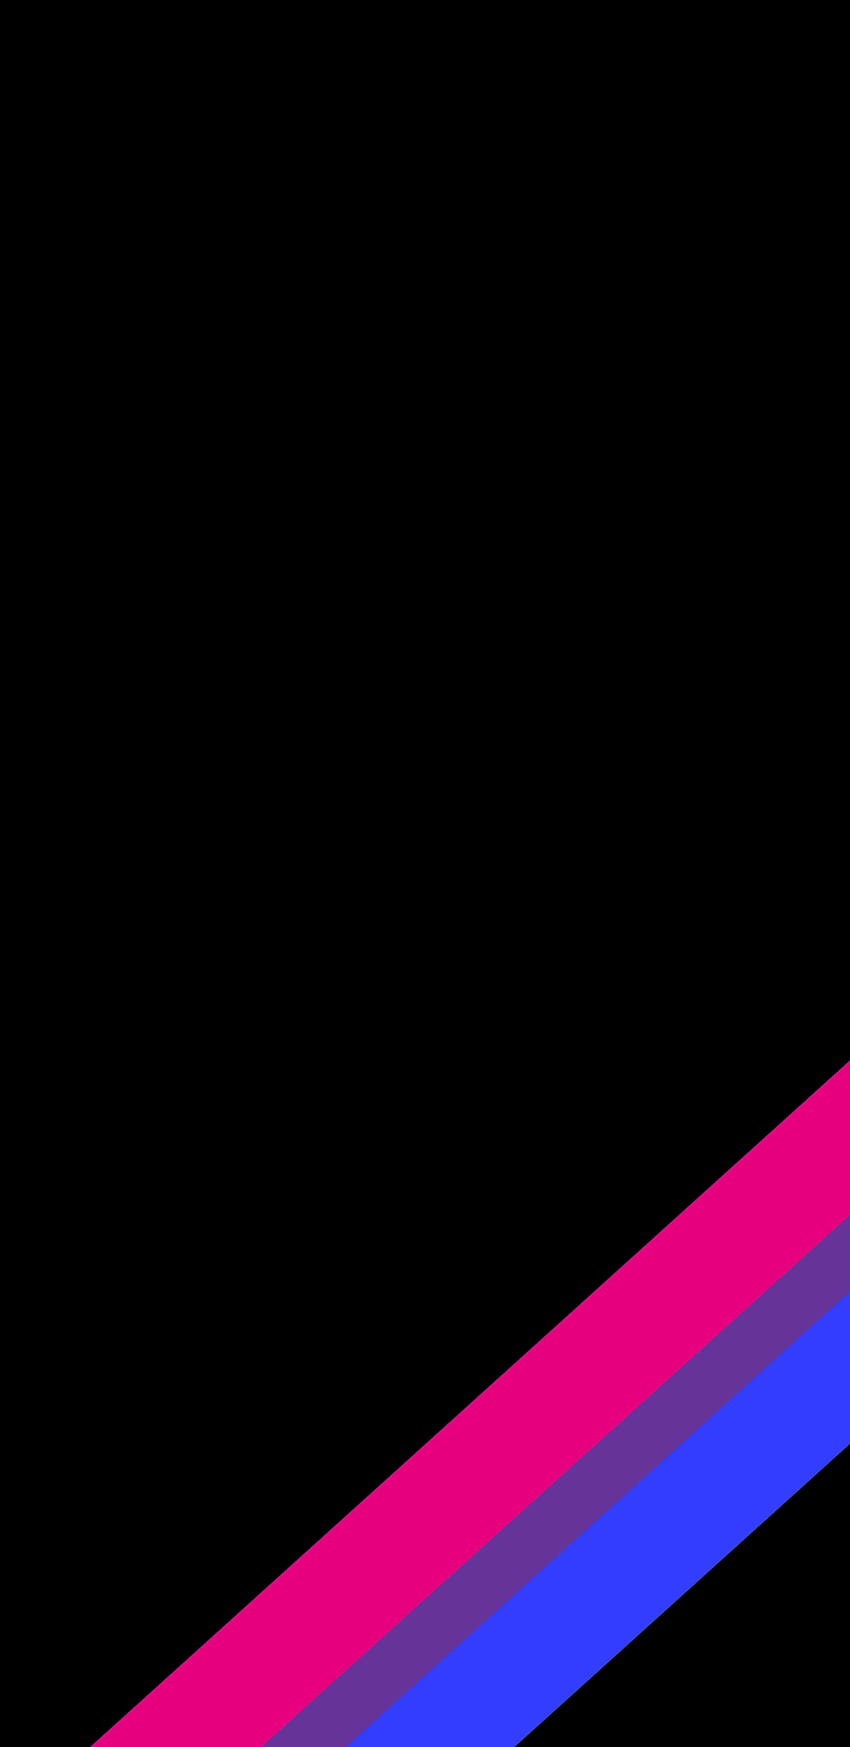 A black wallpaper with a bisexual flag in the corner - Bisexual